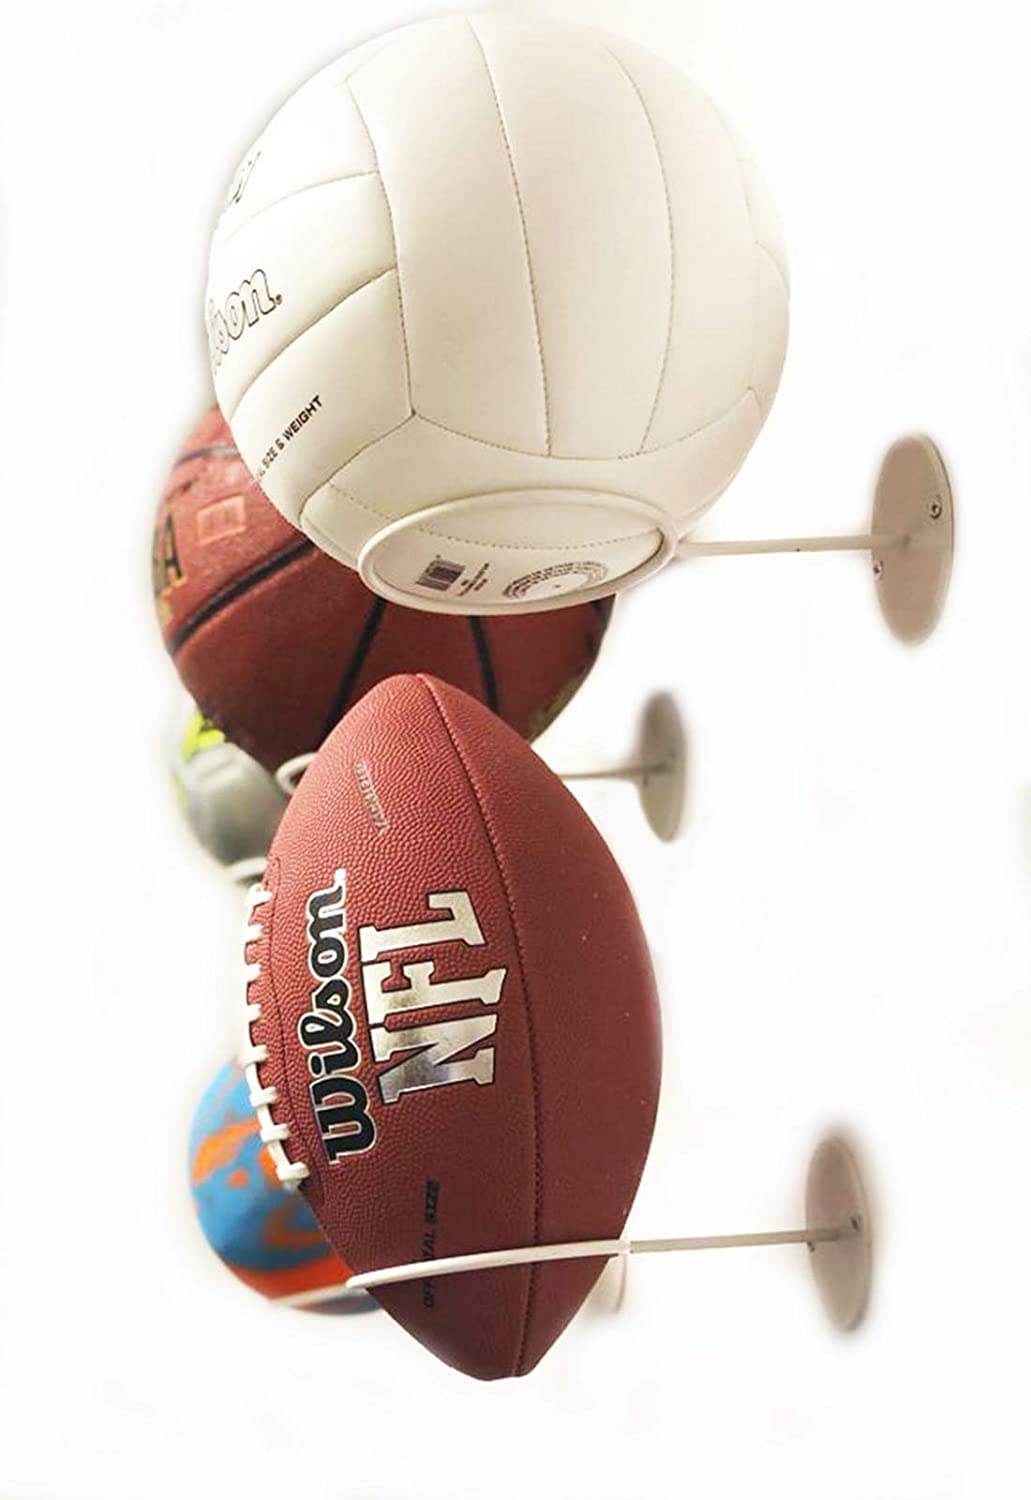 How to Display Sports Memorabilia? - Decomil Store